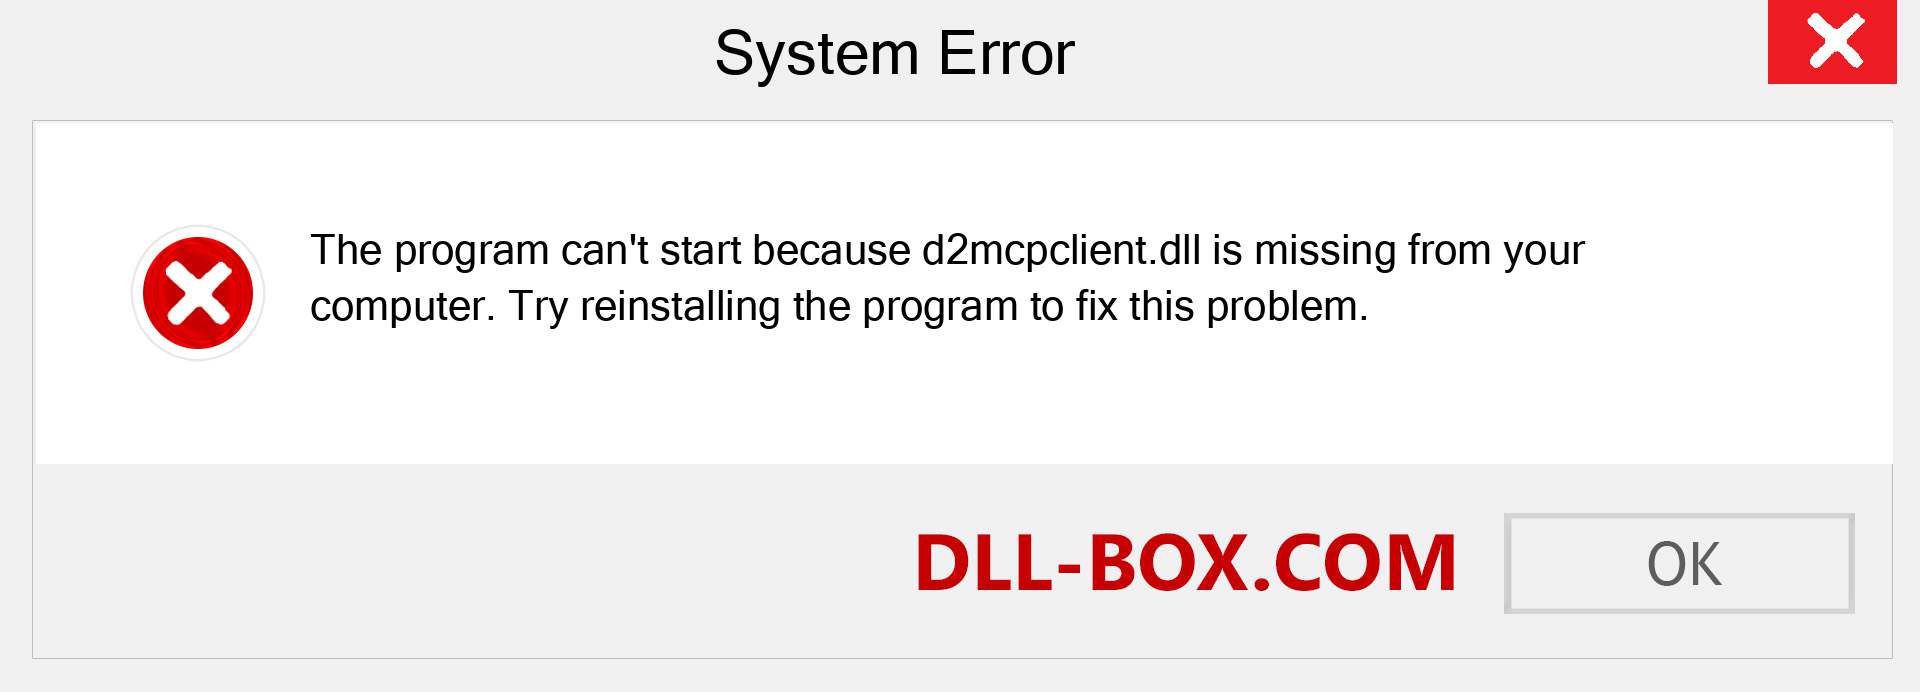  d2mcpclient.dll file is missing?. Download for Windows 7, 8, 10 - Fix  d2mcpclient dll Missing Error on Windows, photos, images